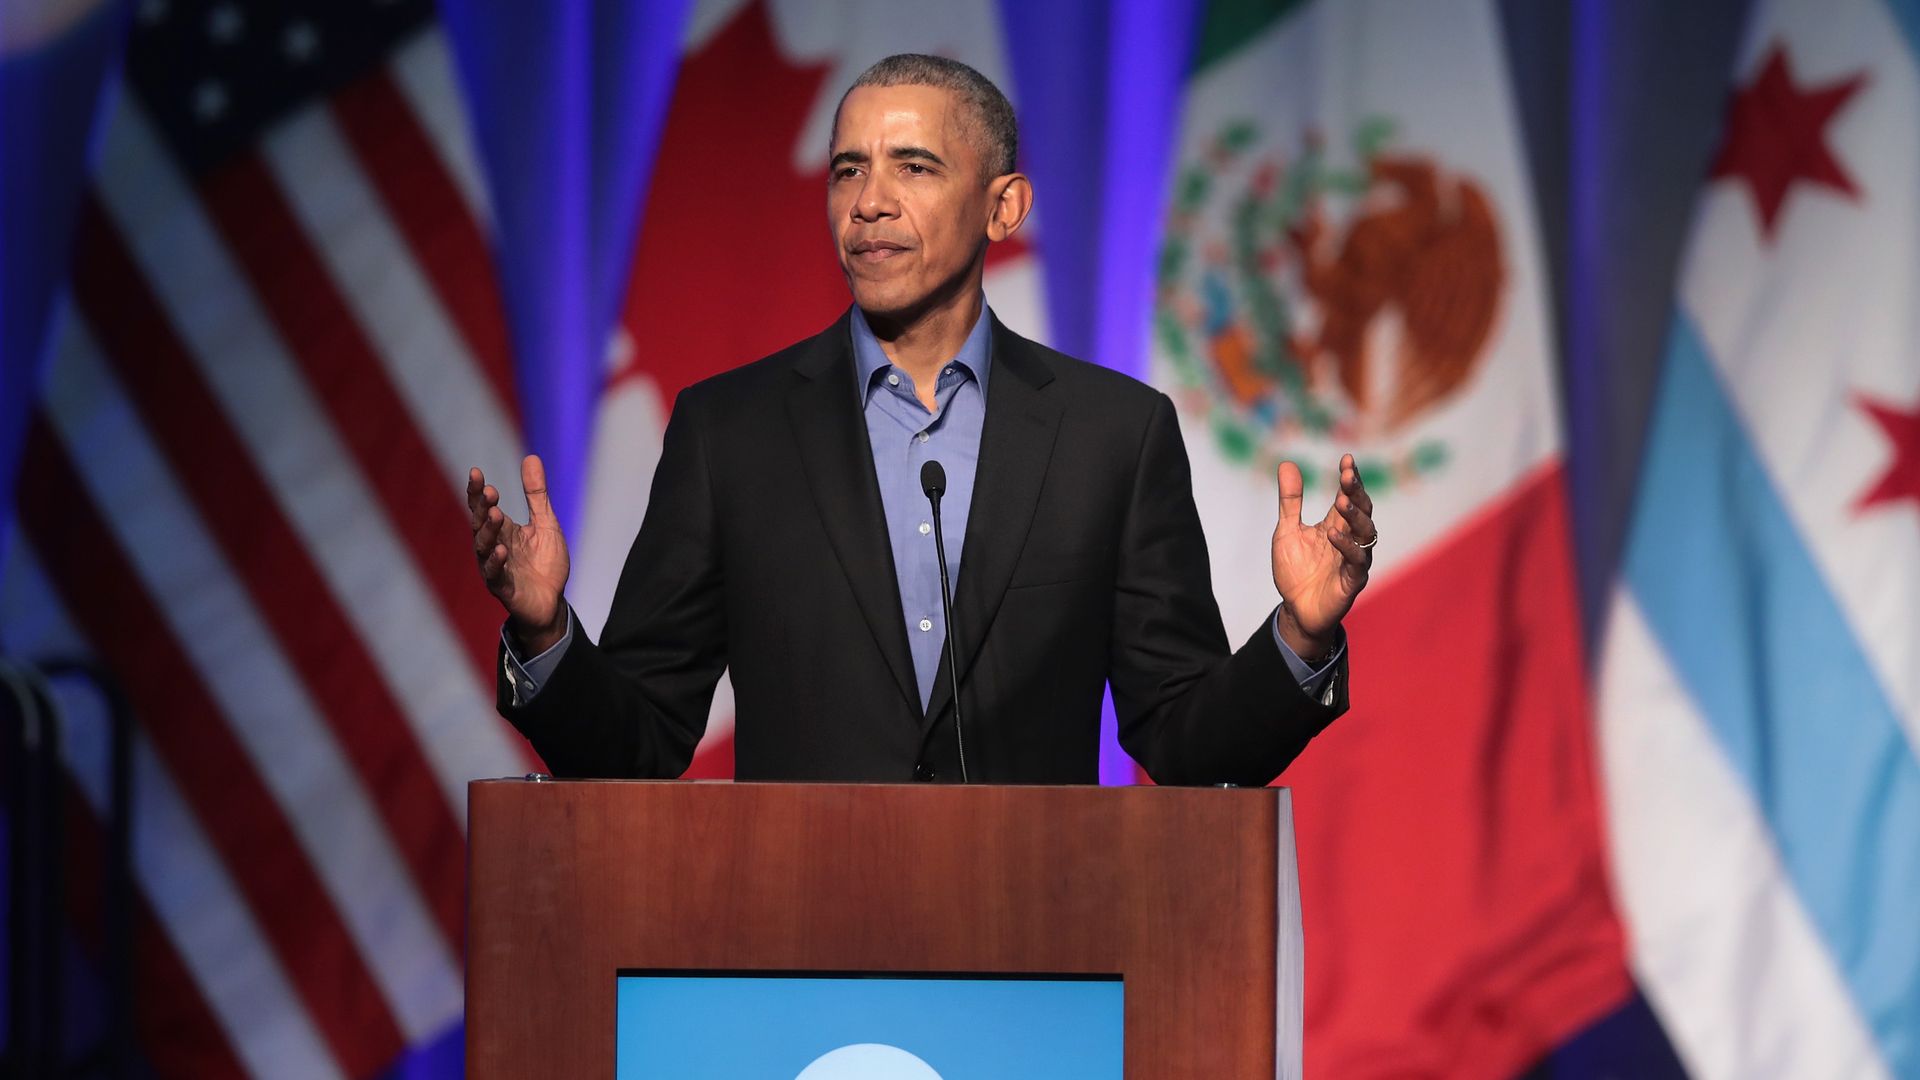 Former president Obama gives a speech in Chicago